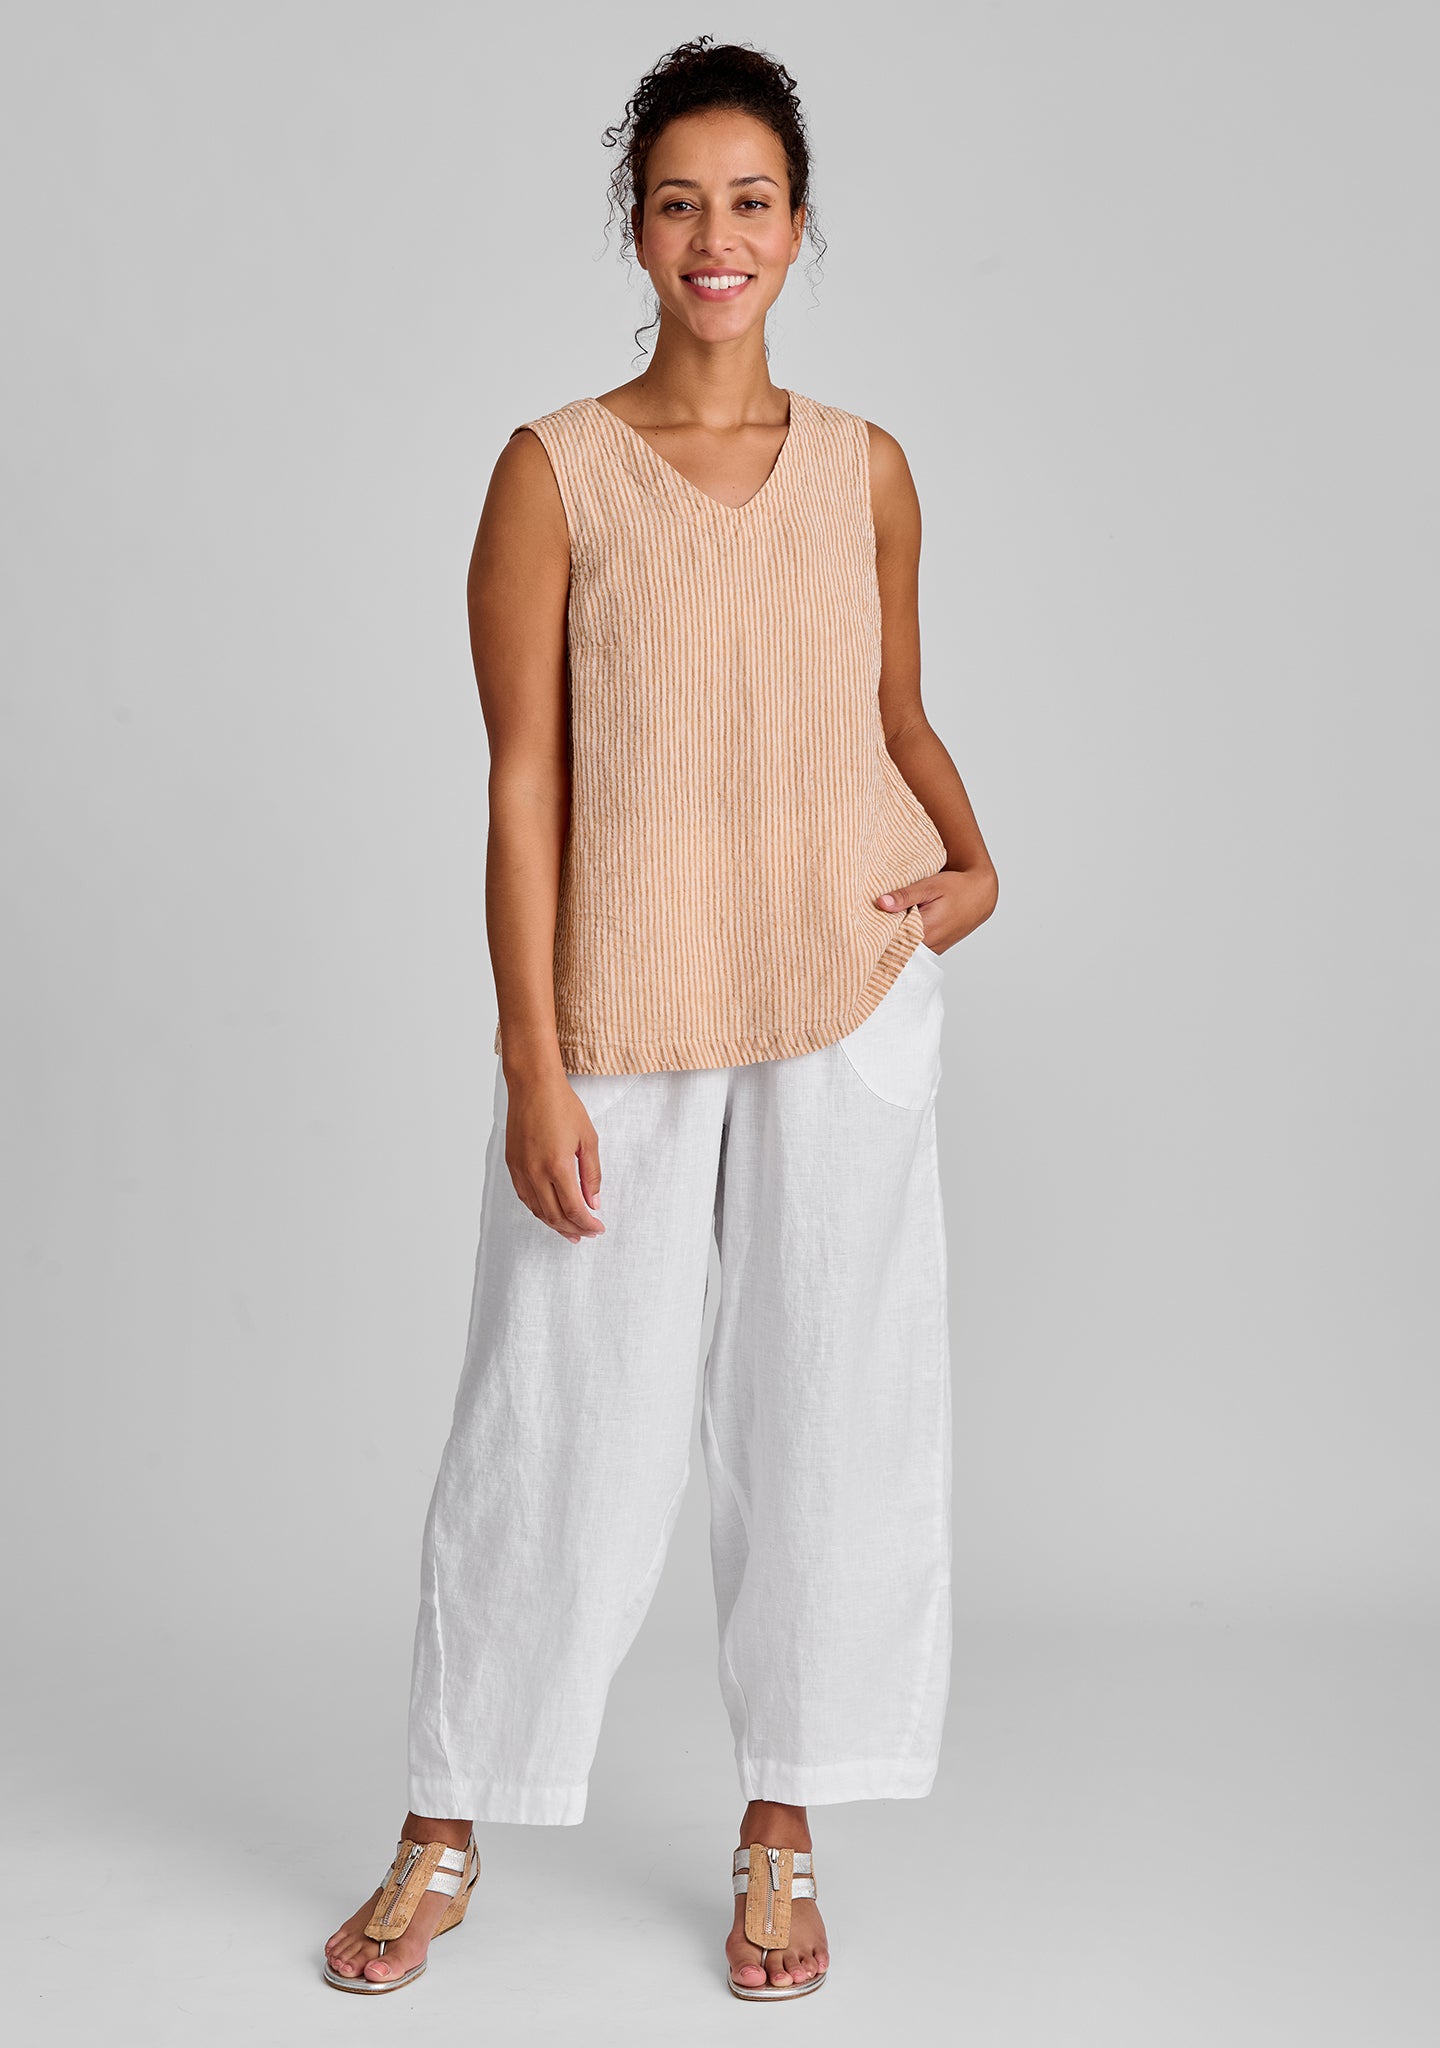 FLAX linen tank in orange with linen pants in white